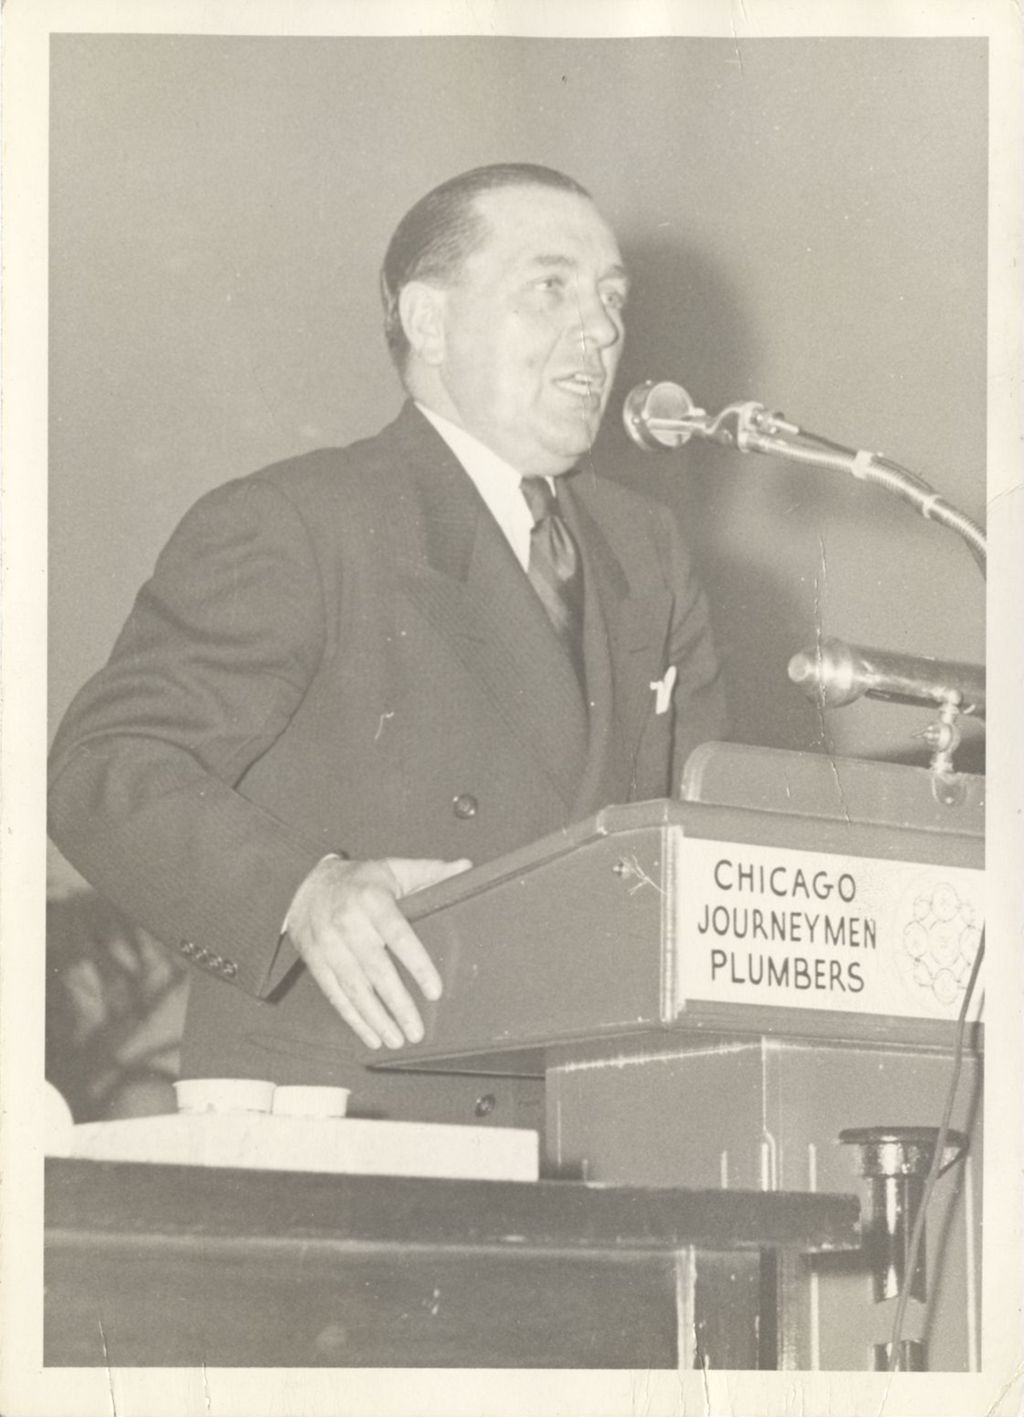 Richard J. Daley speaking to the Chicago Journeymen Plumbers Union